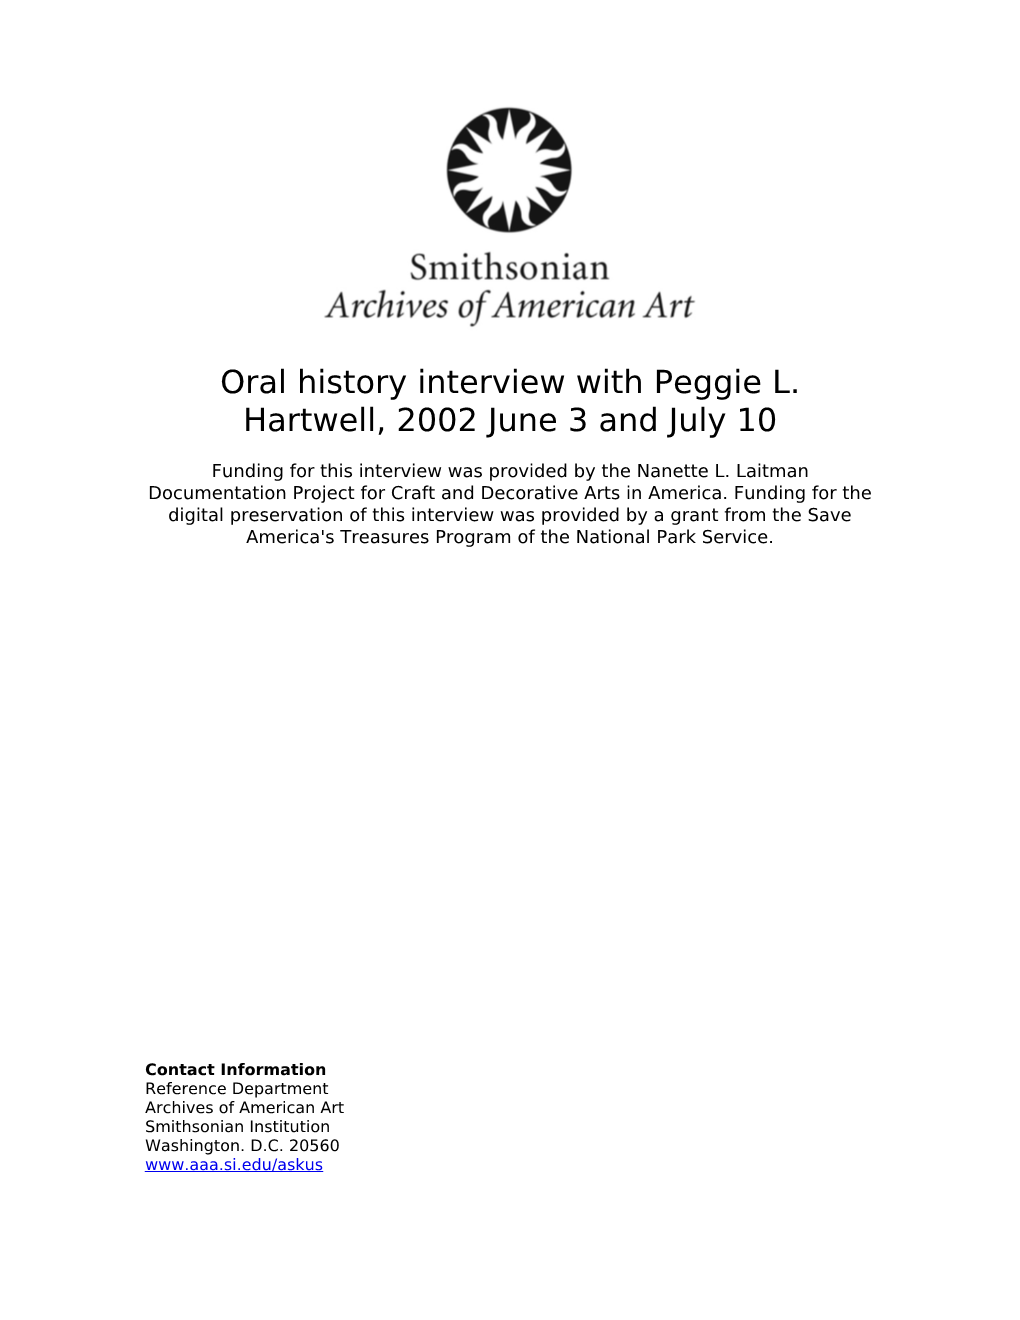 Oral History Interview with Peggie L. Hartwell, 2002 June 3 and July 10